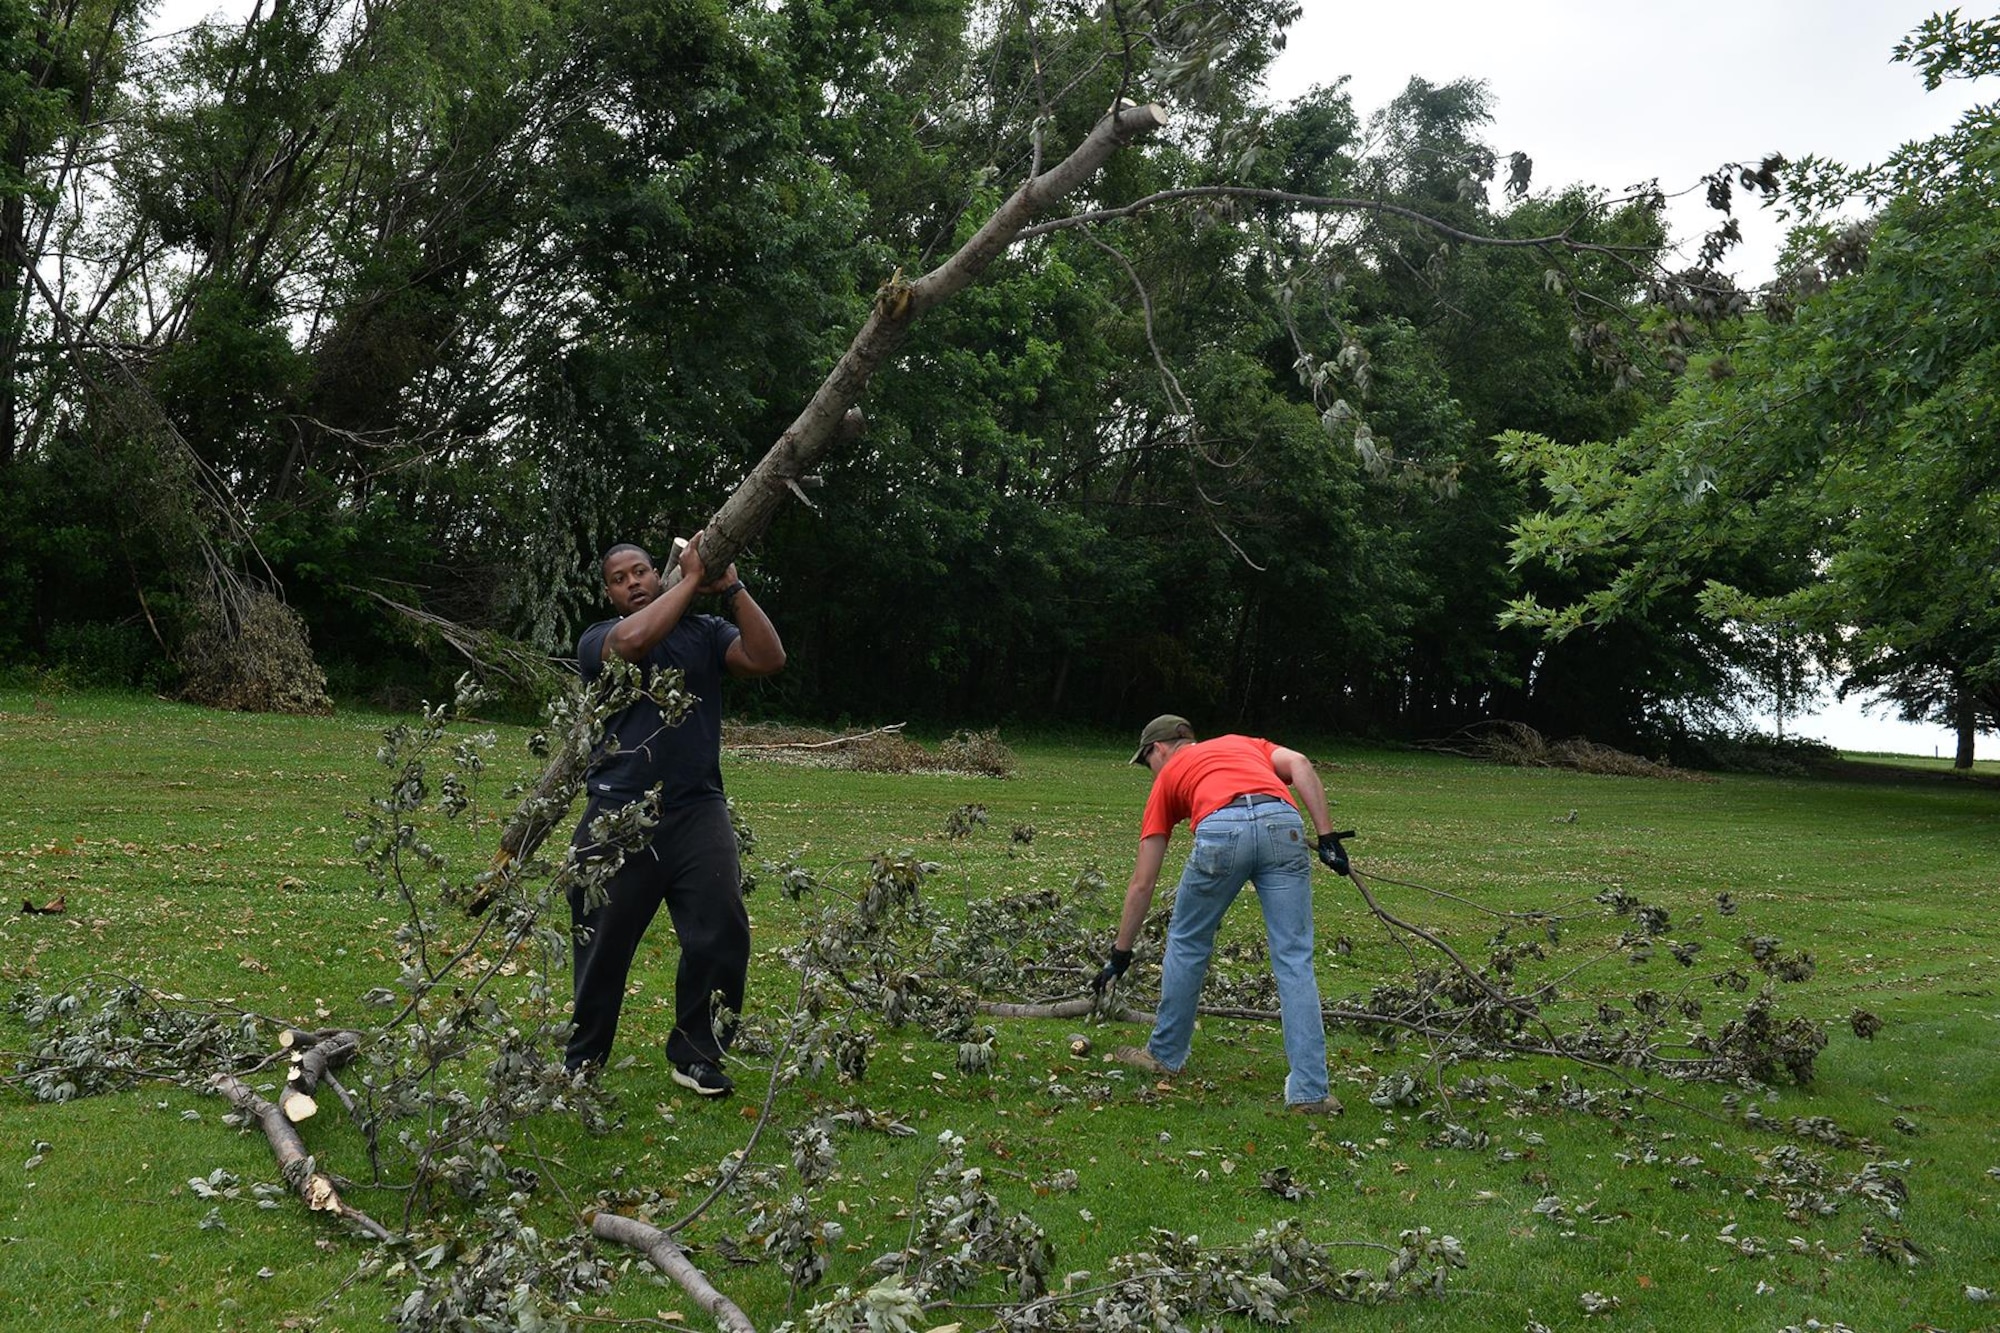 U.S. Air Force Staff Sgt. Jahmal Hardy, 55th Security Forces Squadron, carries a broken tree limb during the Willow Lake golf course cleanup on Offutt AFB, Neb., June 23. Hardy and other members of Team Offutt volunteered to help clean up the golf course following a powerful storm that hit the base June 16. The storm produced EF1 and EF2 tornadoes and caused significant damage to parts of Offutt AFB. (U.S. Air Force photo by Charles Haymond)